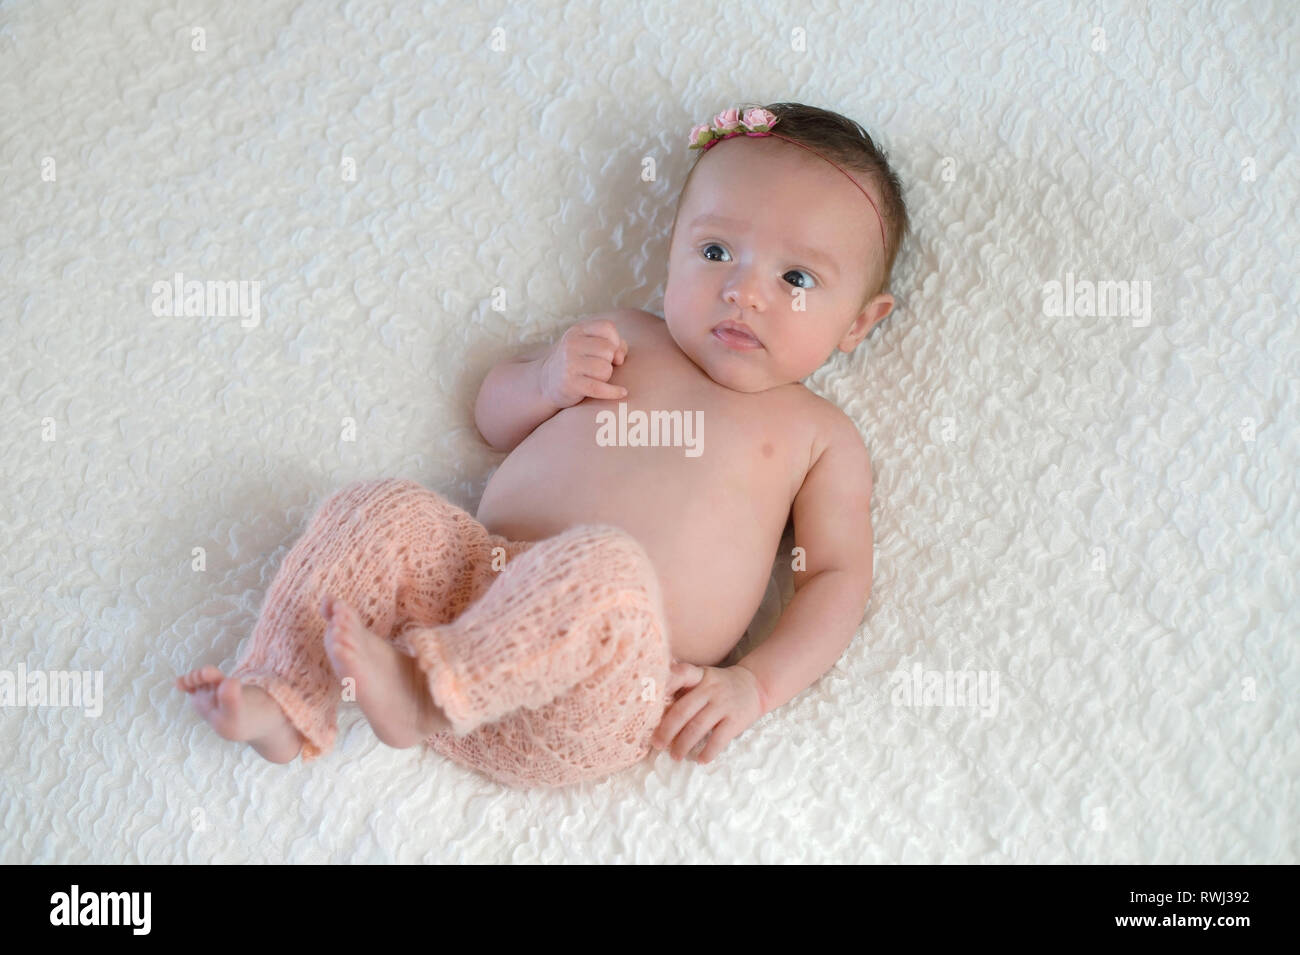 Portrait of an alert, one month old, baby girl wearing knitted, pale pink pants. Stock Photo